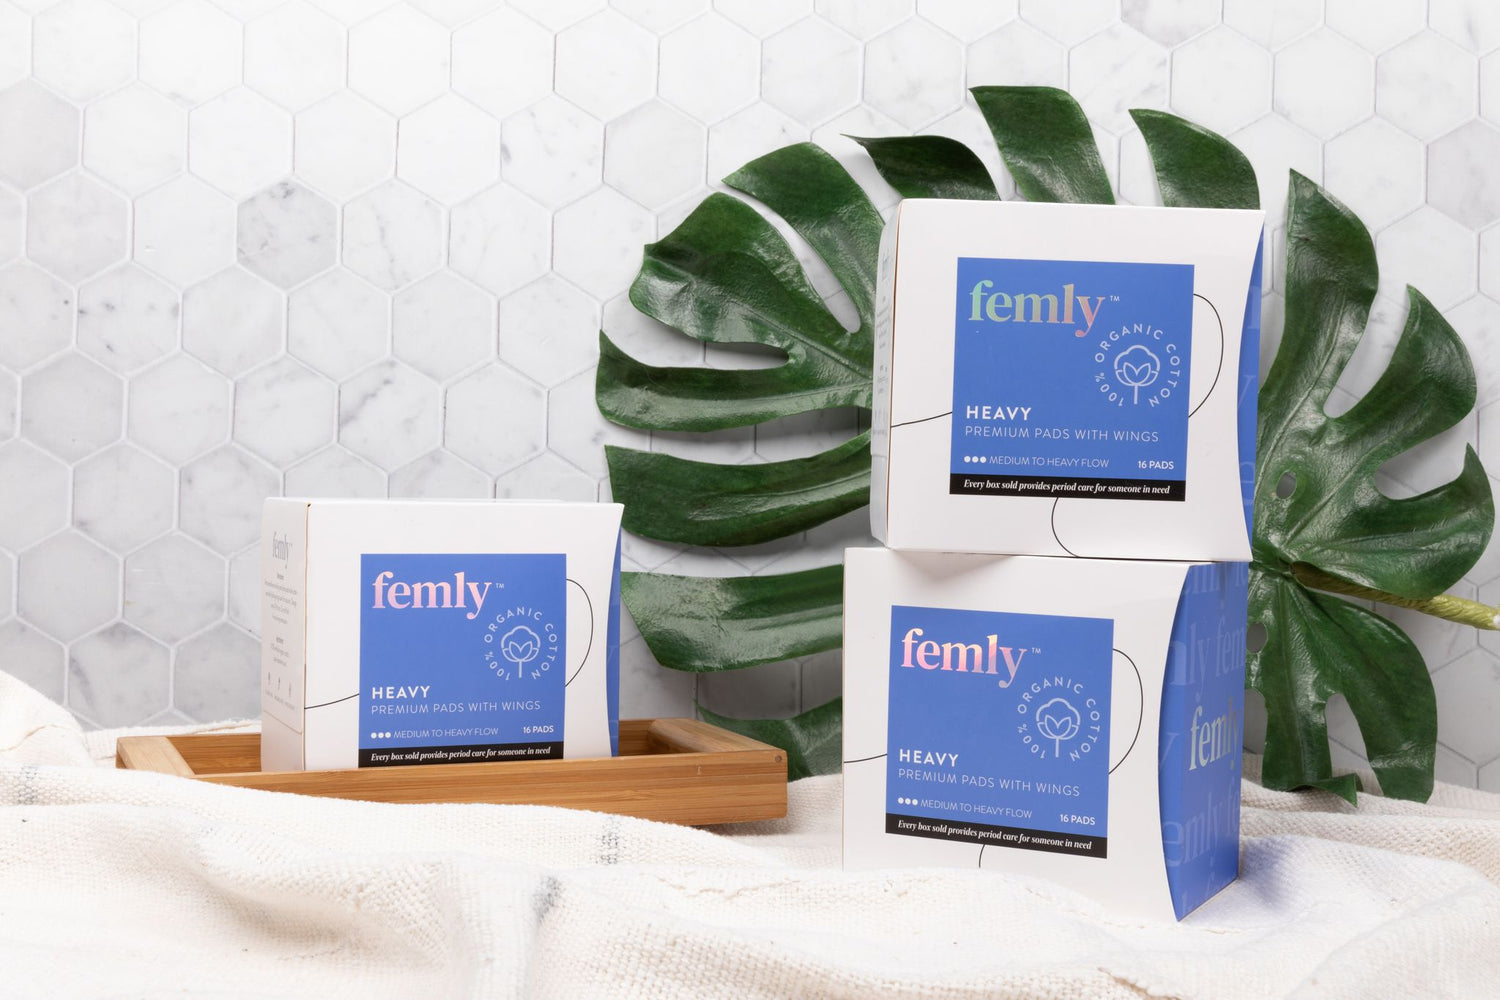 Three boxes of 100% organic cotton heavy menstrual pads in a bathroom setting with a leaf.